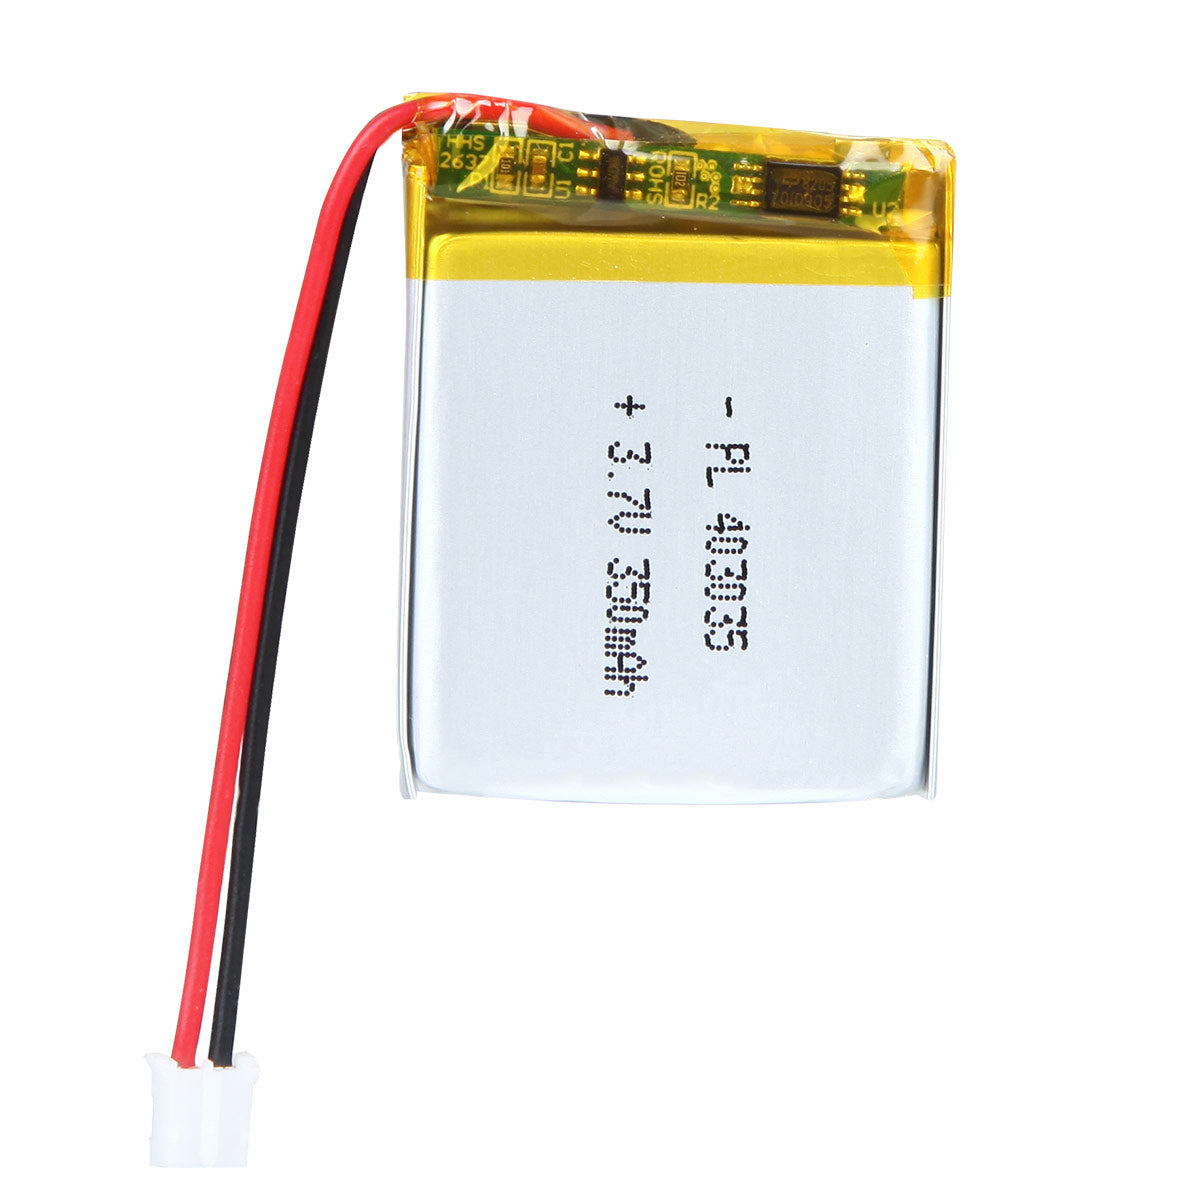 YDL 3.7V 350mAh 403035 Rechargeable Lithium Polymer Battery Length 37mm